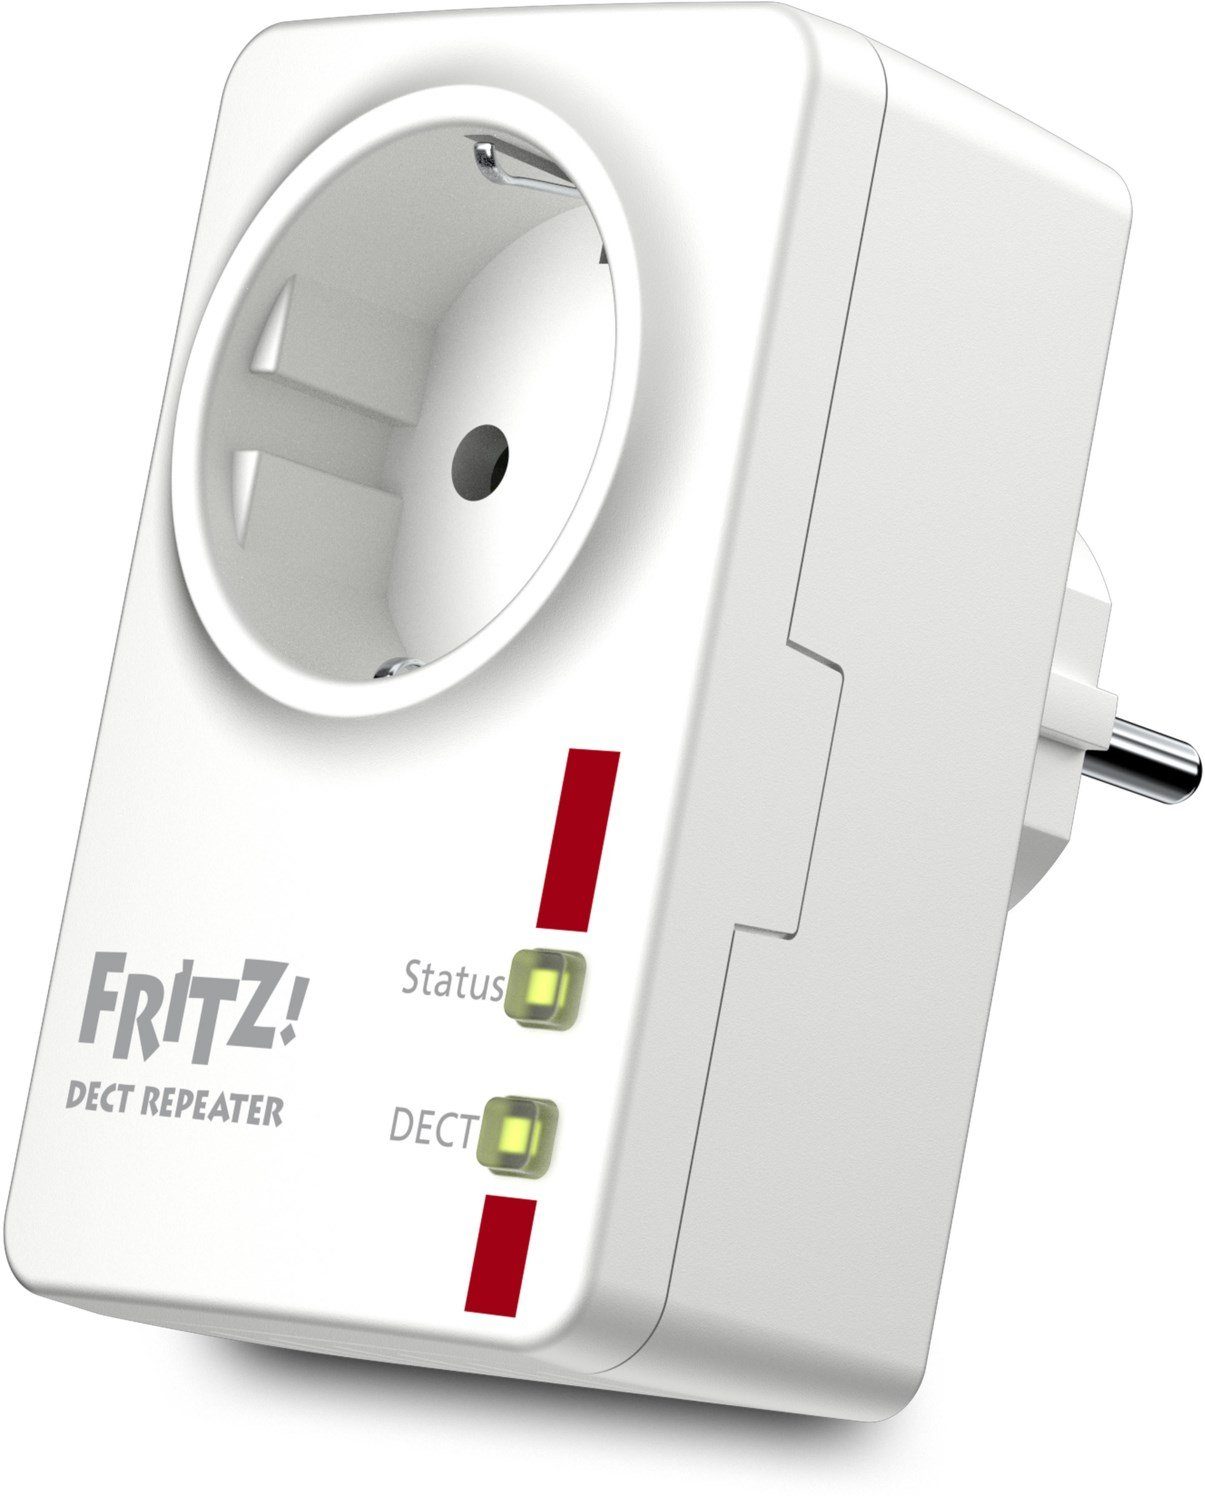 Fritz! AVM FRITZ!DECT Repeater 100 WLAN-Router WLAN-Repeater